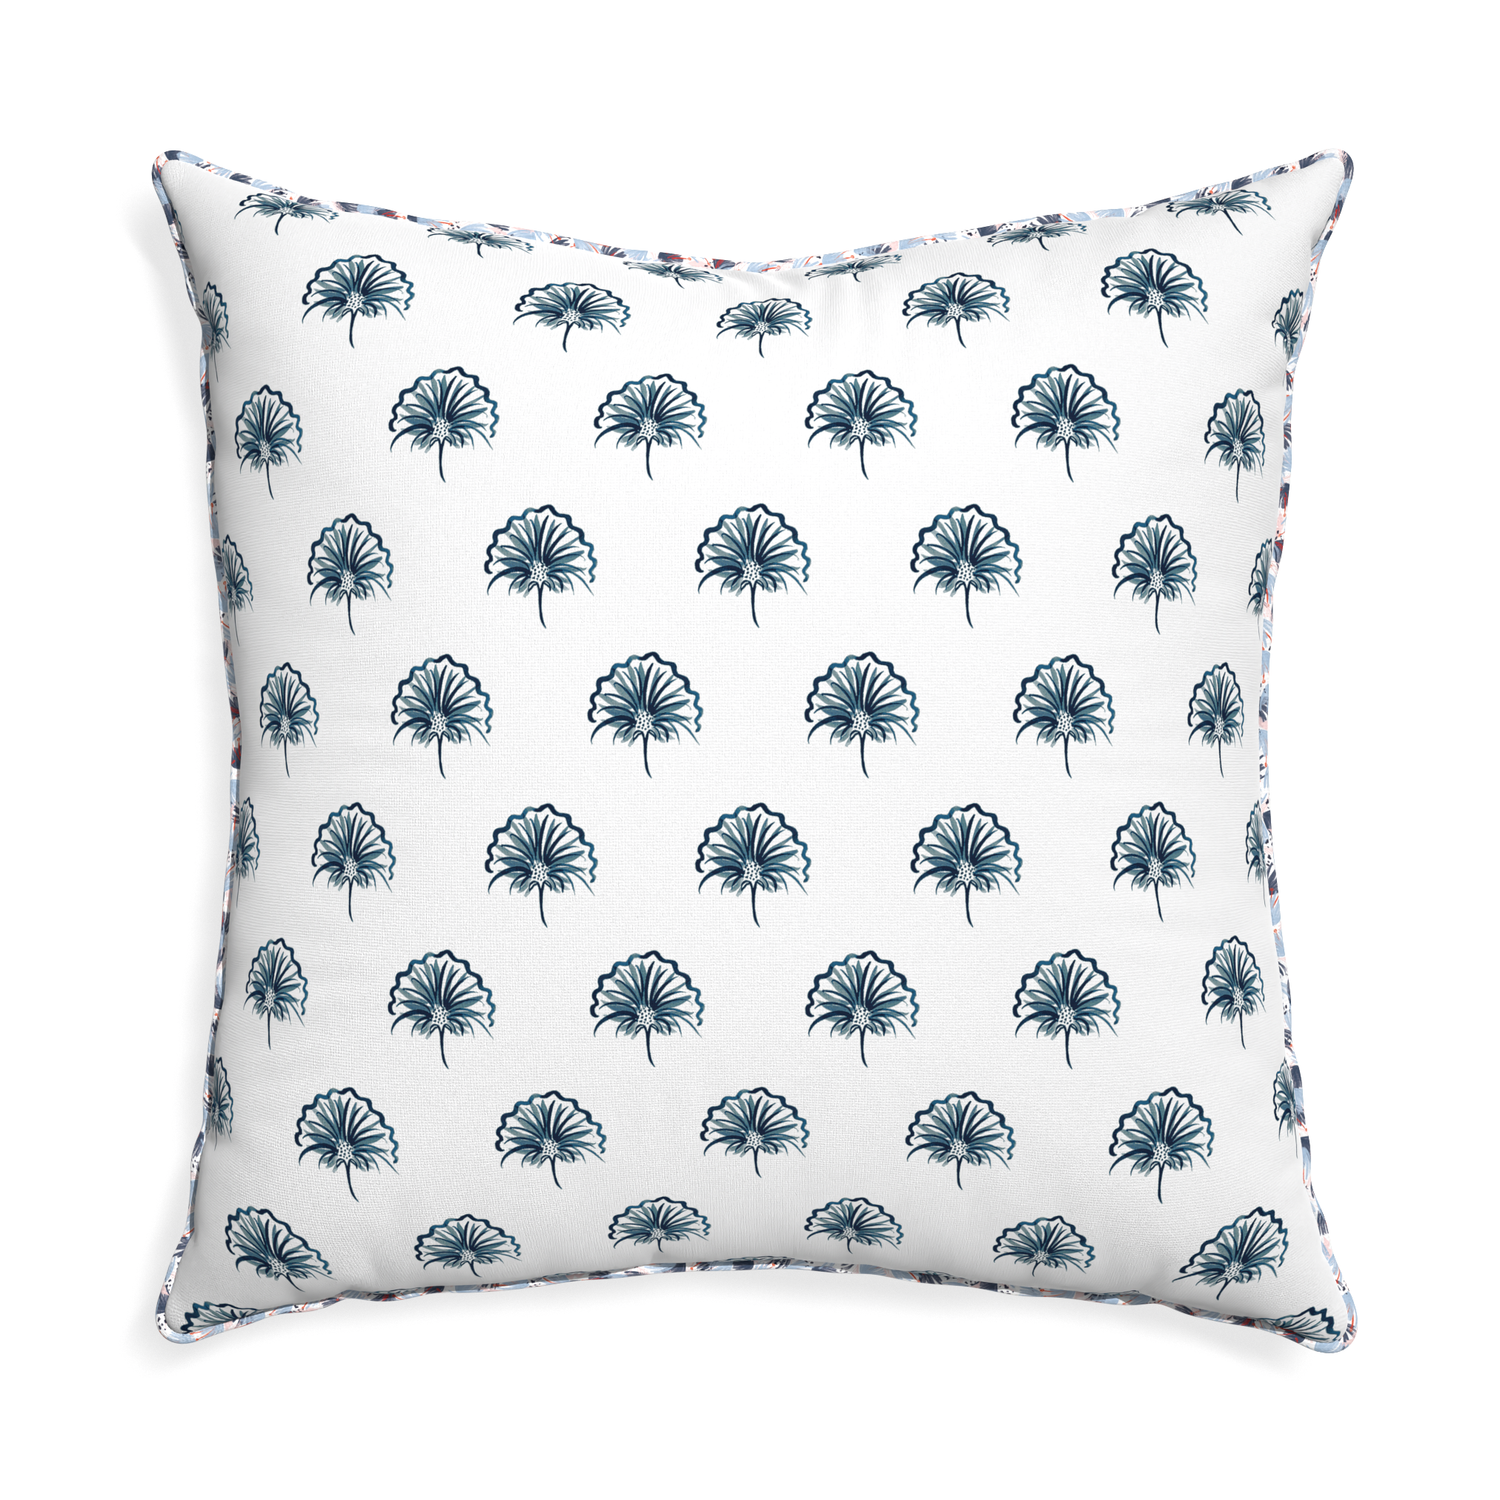 Euro-sham penelope midnight custom floral navypillow with e piping on white background